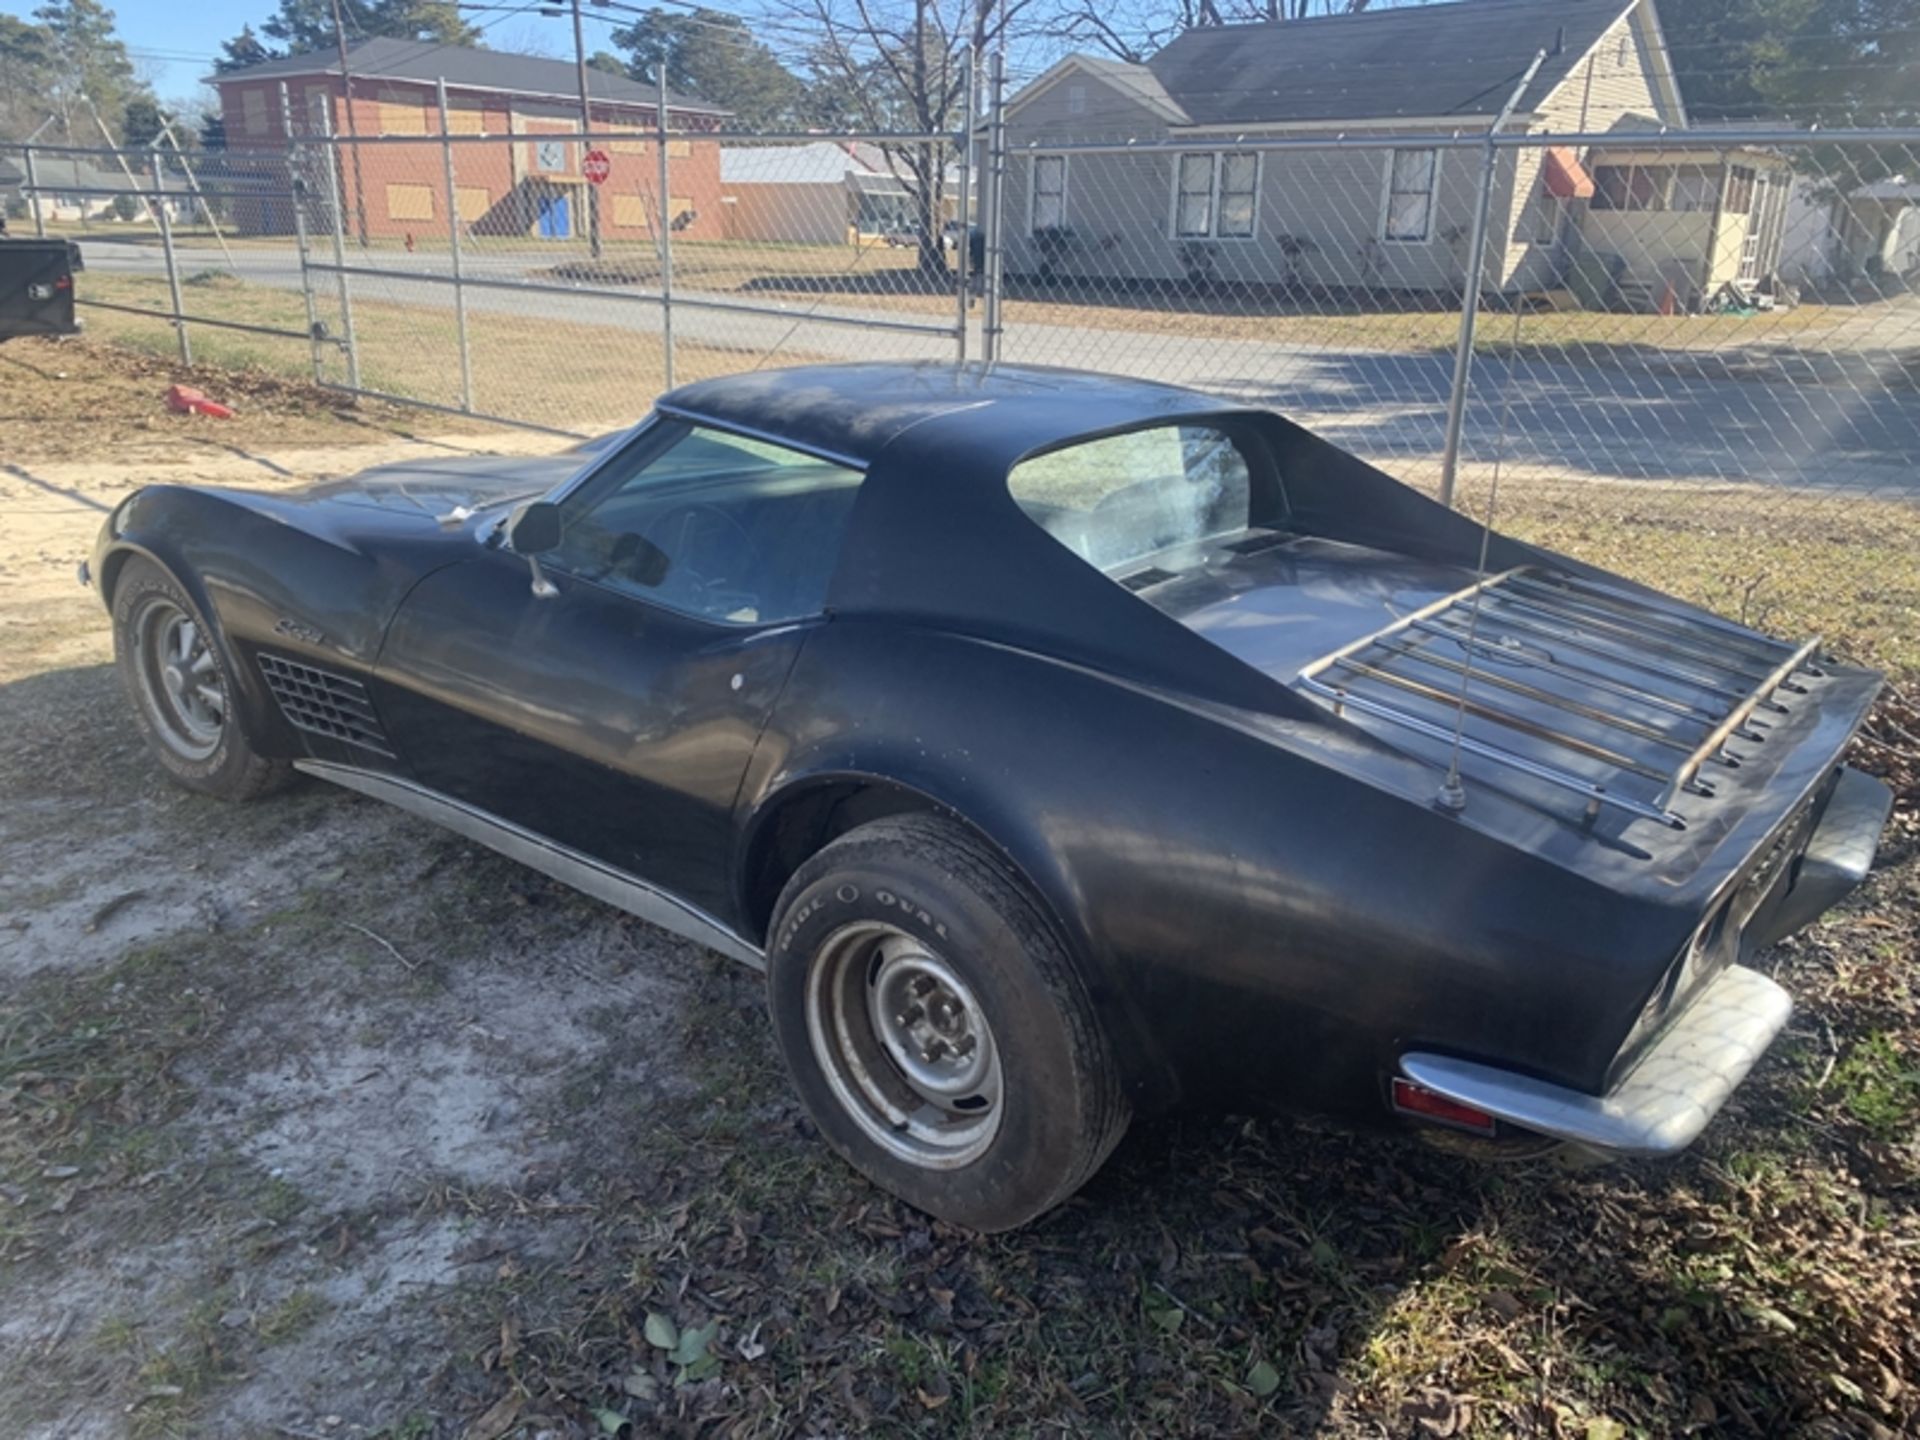 1972 CHEVROLET Corvette Stingray 4-speed manual, 350 V8 - unknown miles - has been sitting up and - Image 4 of 11